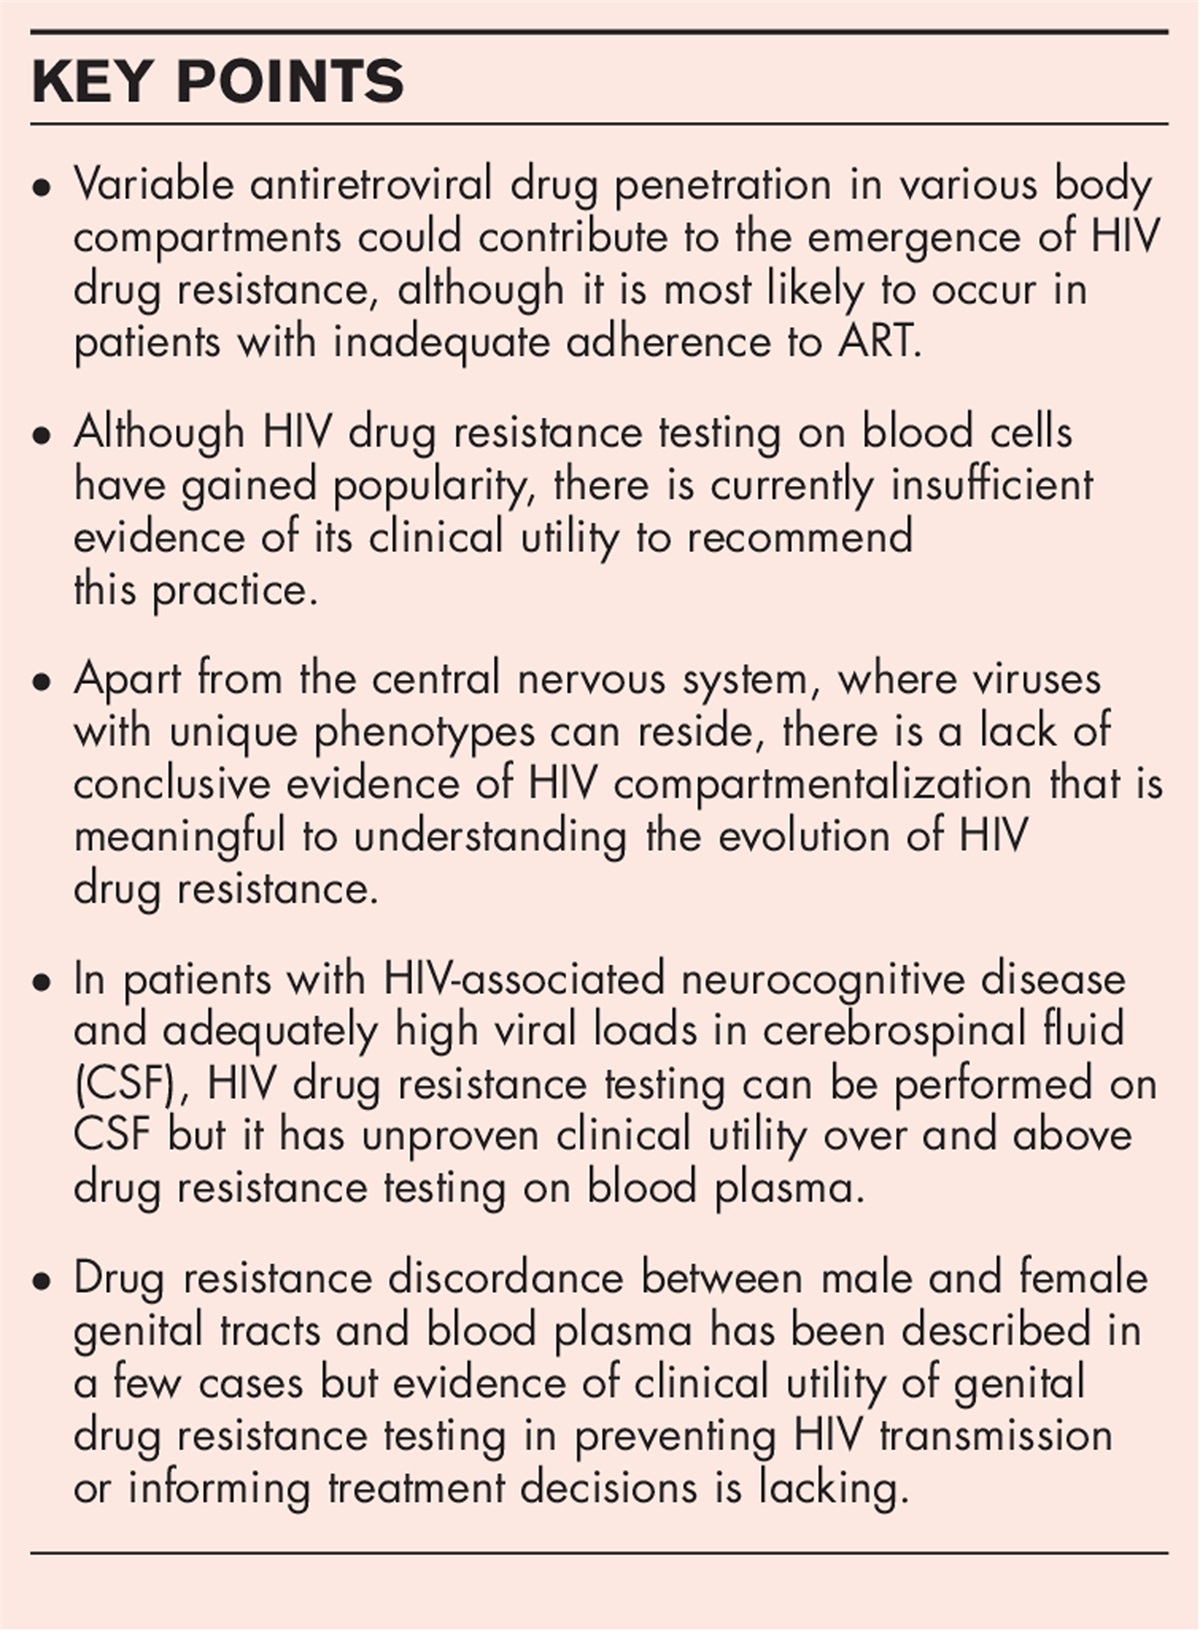 HIV drug resistance in various body compartments